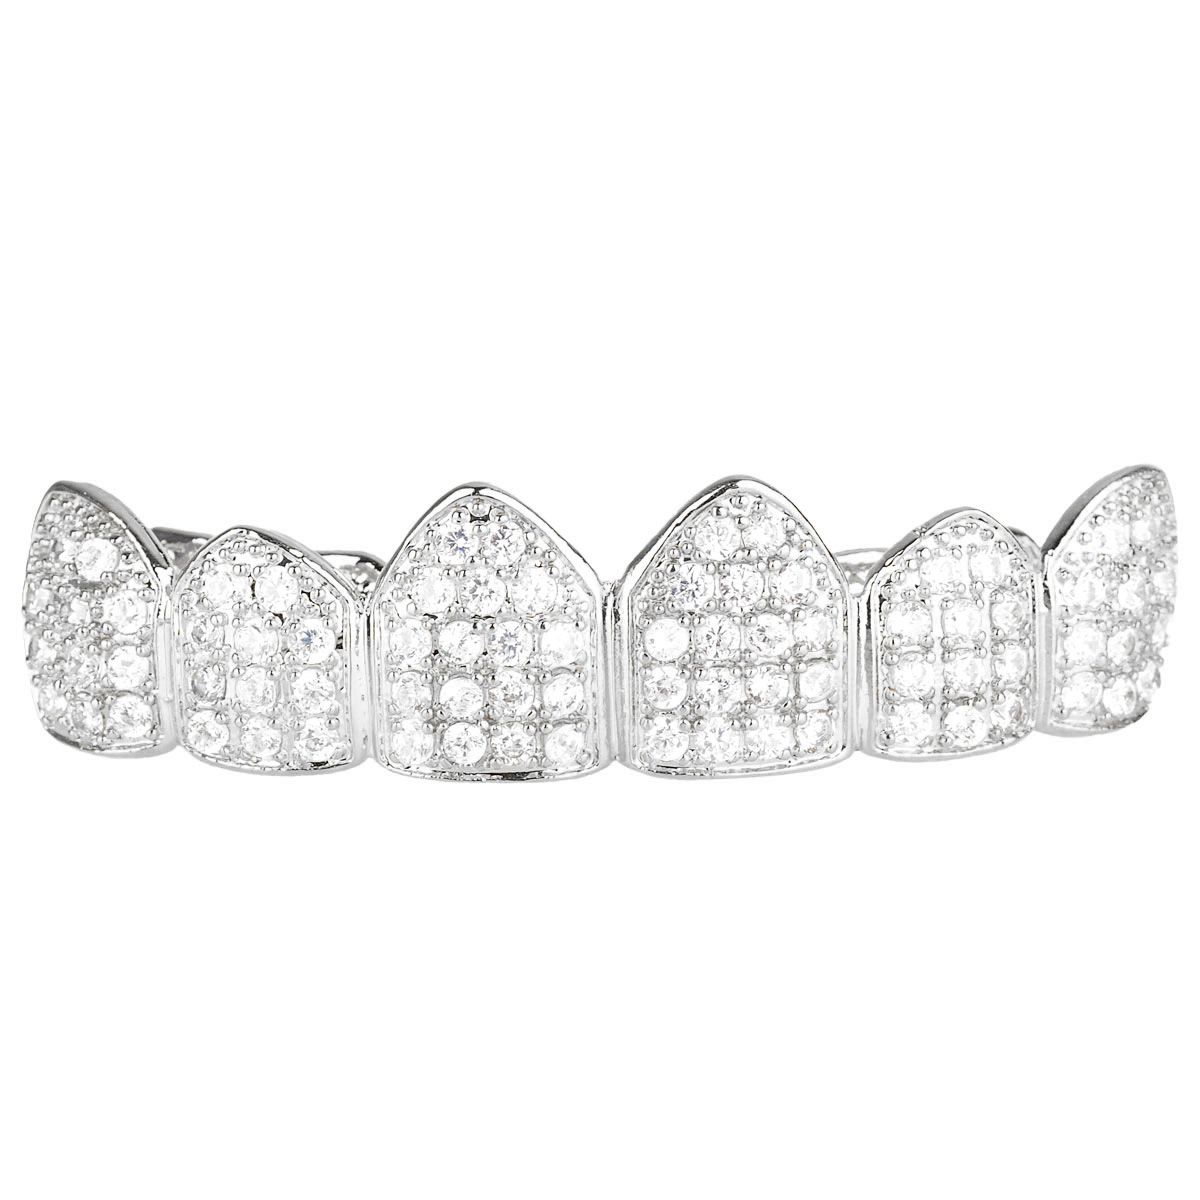 Grillz – Silber – One size fits all – CUBIC ZIRKONIA Top